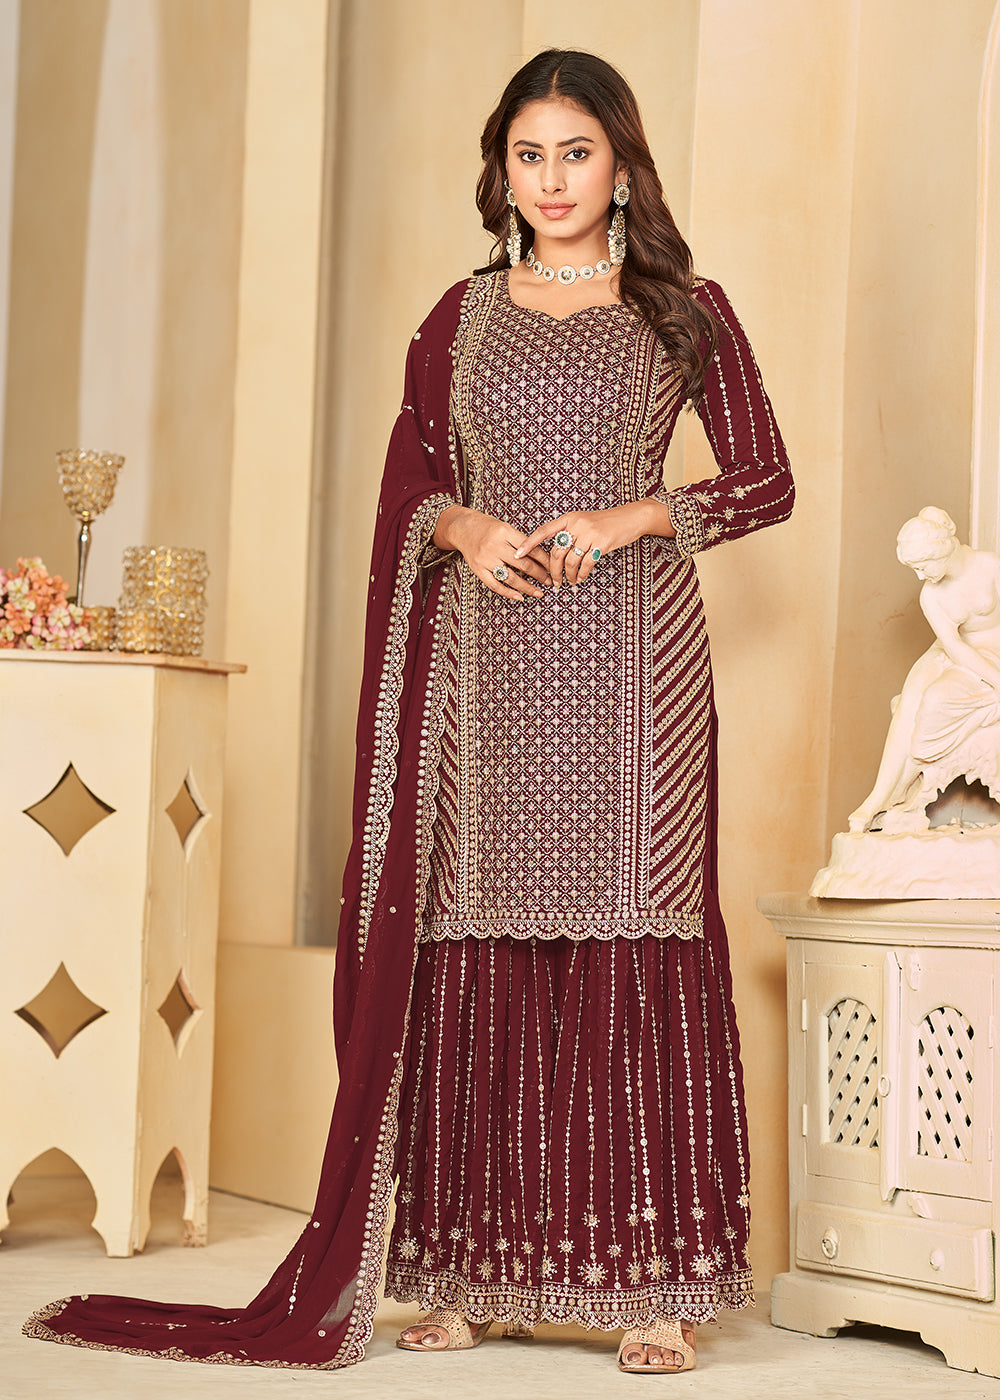 Buy Now Mesmeric Maroon Faux Georgette Palazzo Suit with Embroidery Online in USA, UK, Canada, Germany, Australia & Worldwide at Empress Clothing.